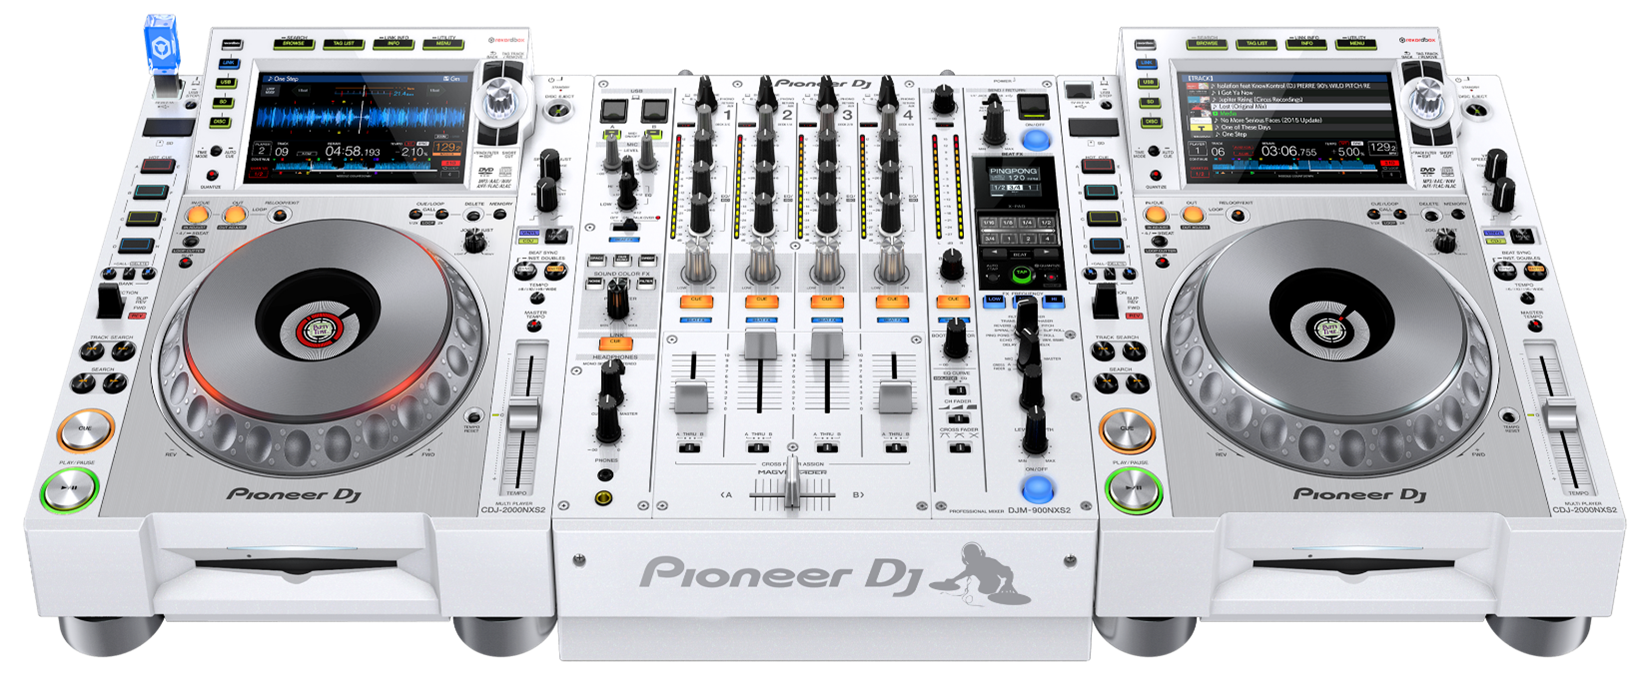 A white pioneer dj mixer and dj controller on a white background.